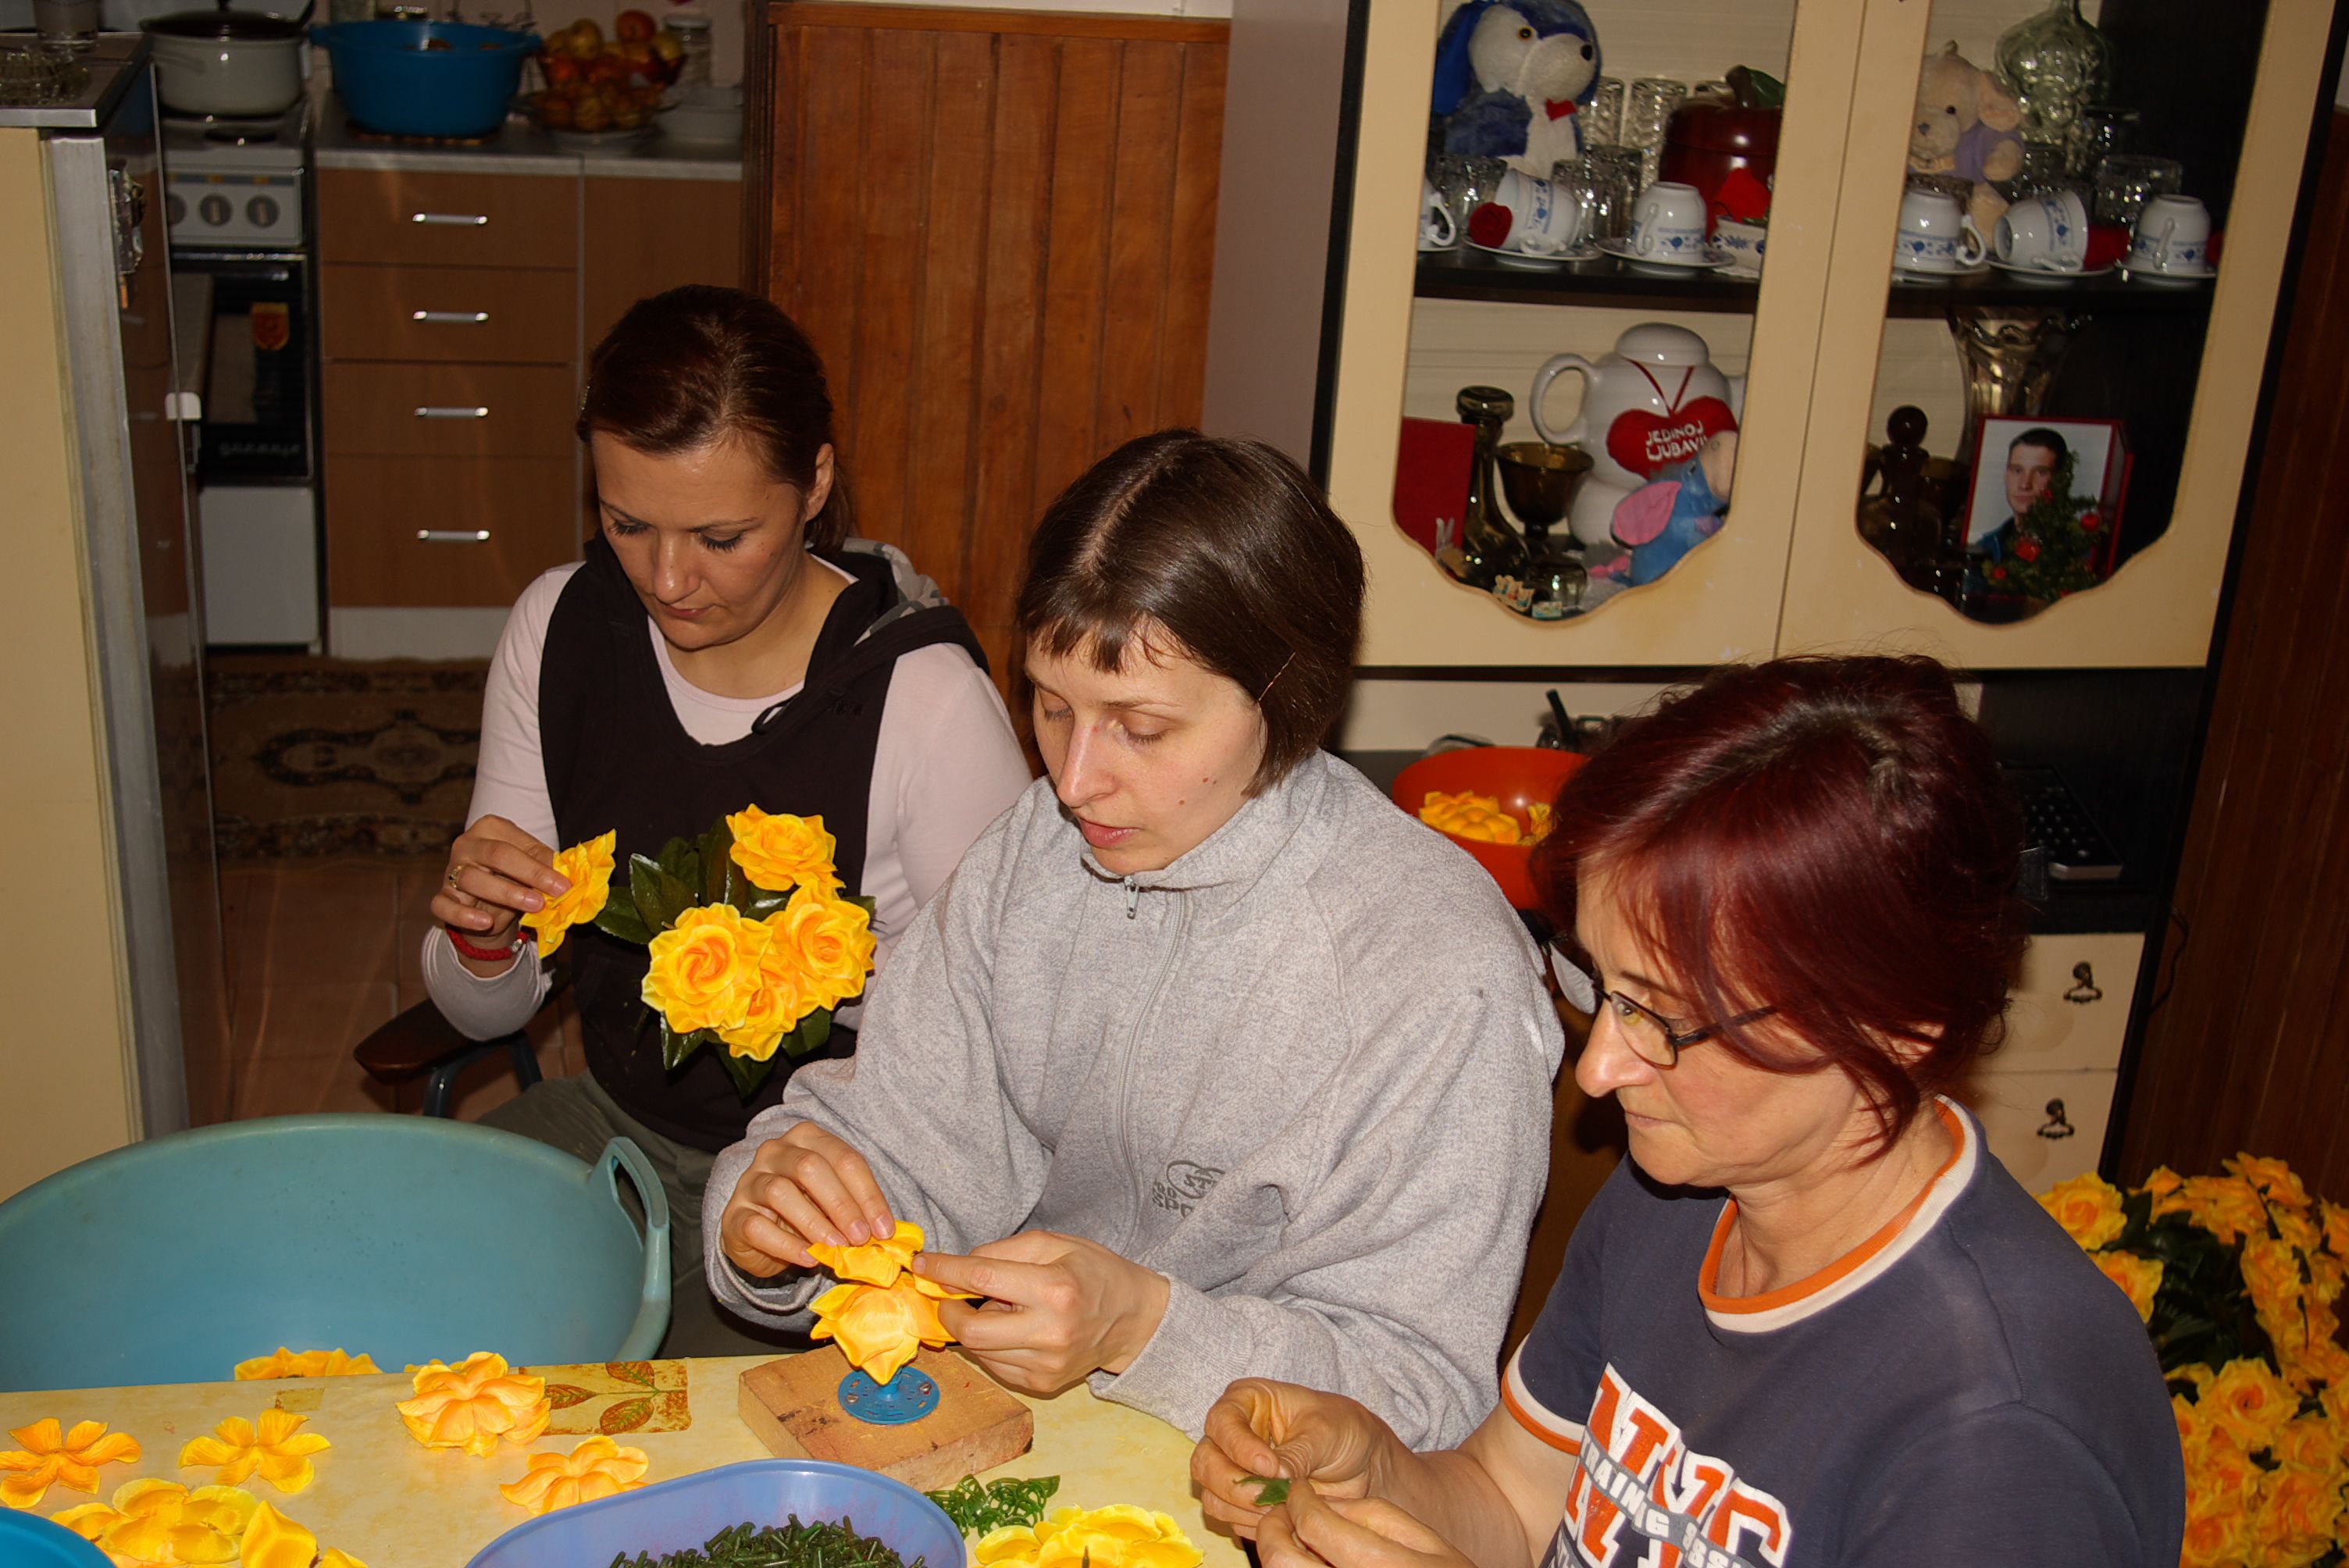 3 individuals crafting with flowers at a table in a domestic setting, with a sideboard and room in the background